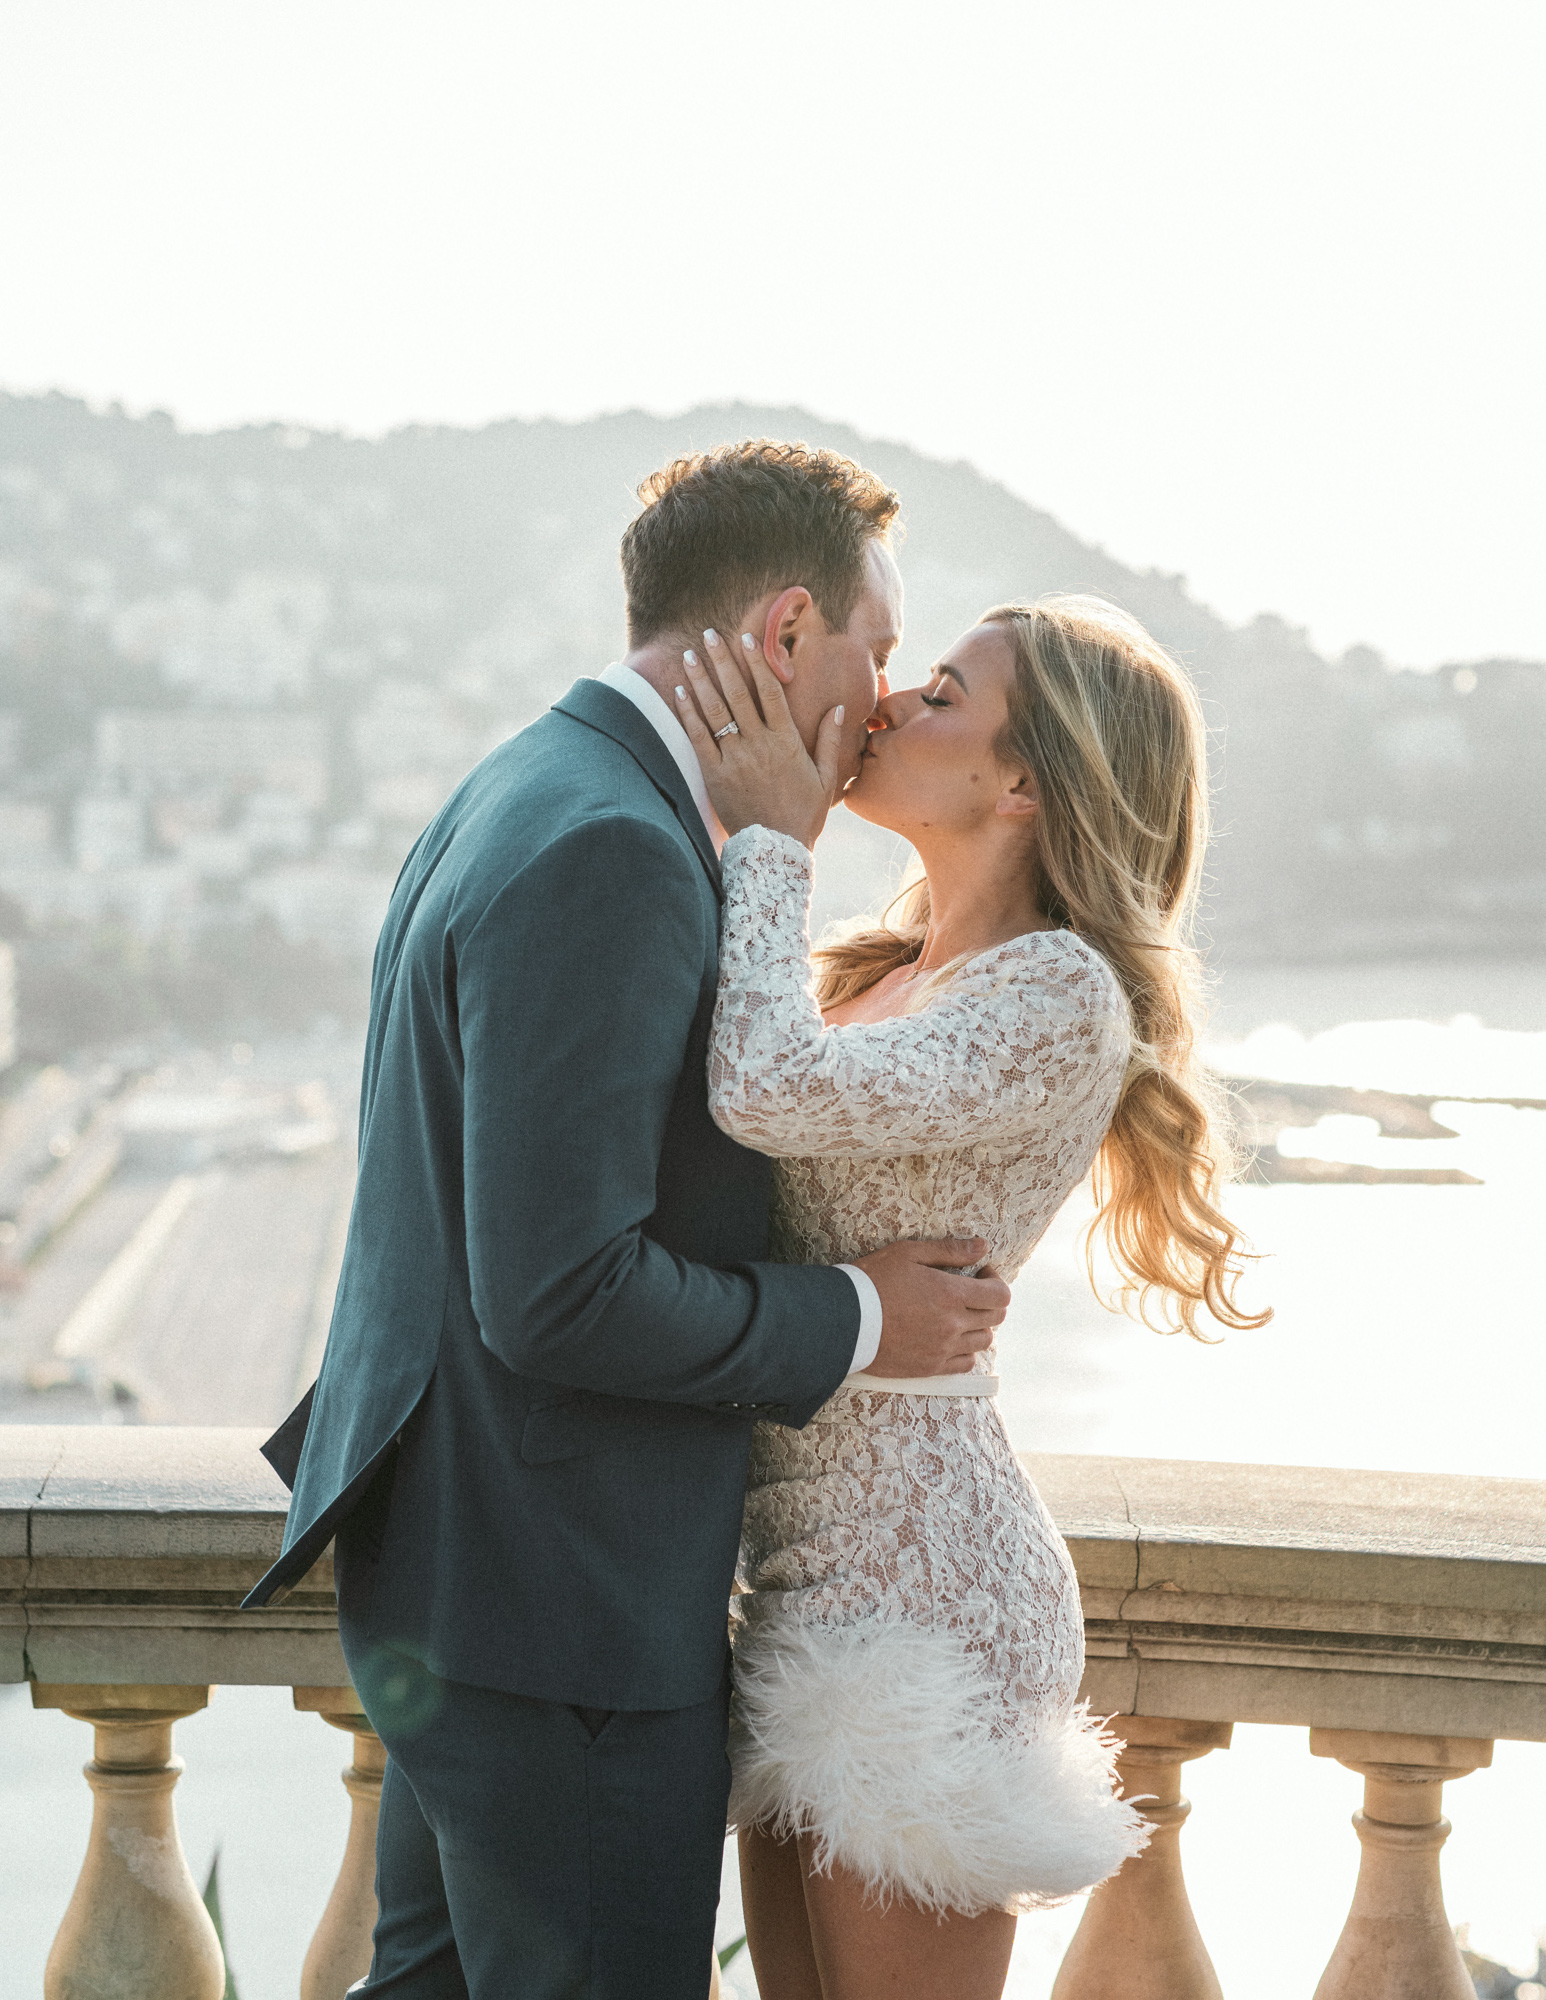 newlyweds passionately kiss in nice france